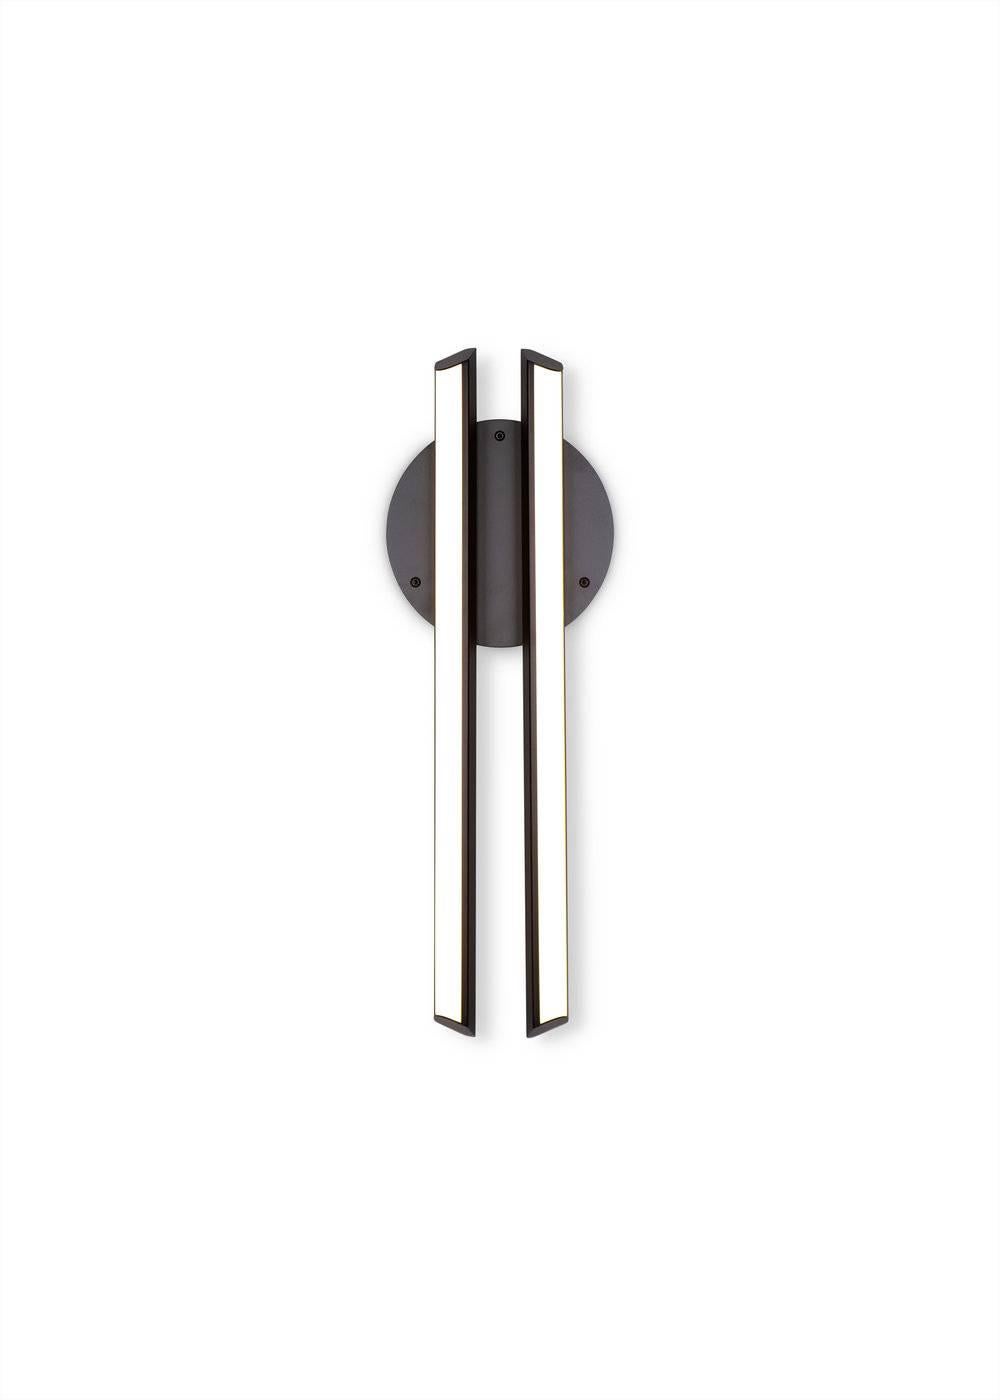 CHIME 23 sconce is inspired by the harmonious sound of resonating bells. CHIME features two parallel bars of soft warm light floating over a disc backplate. Available in two sizes, perfect for a hallway or vanity.

METAL FINISH
Powder-coat finish